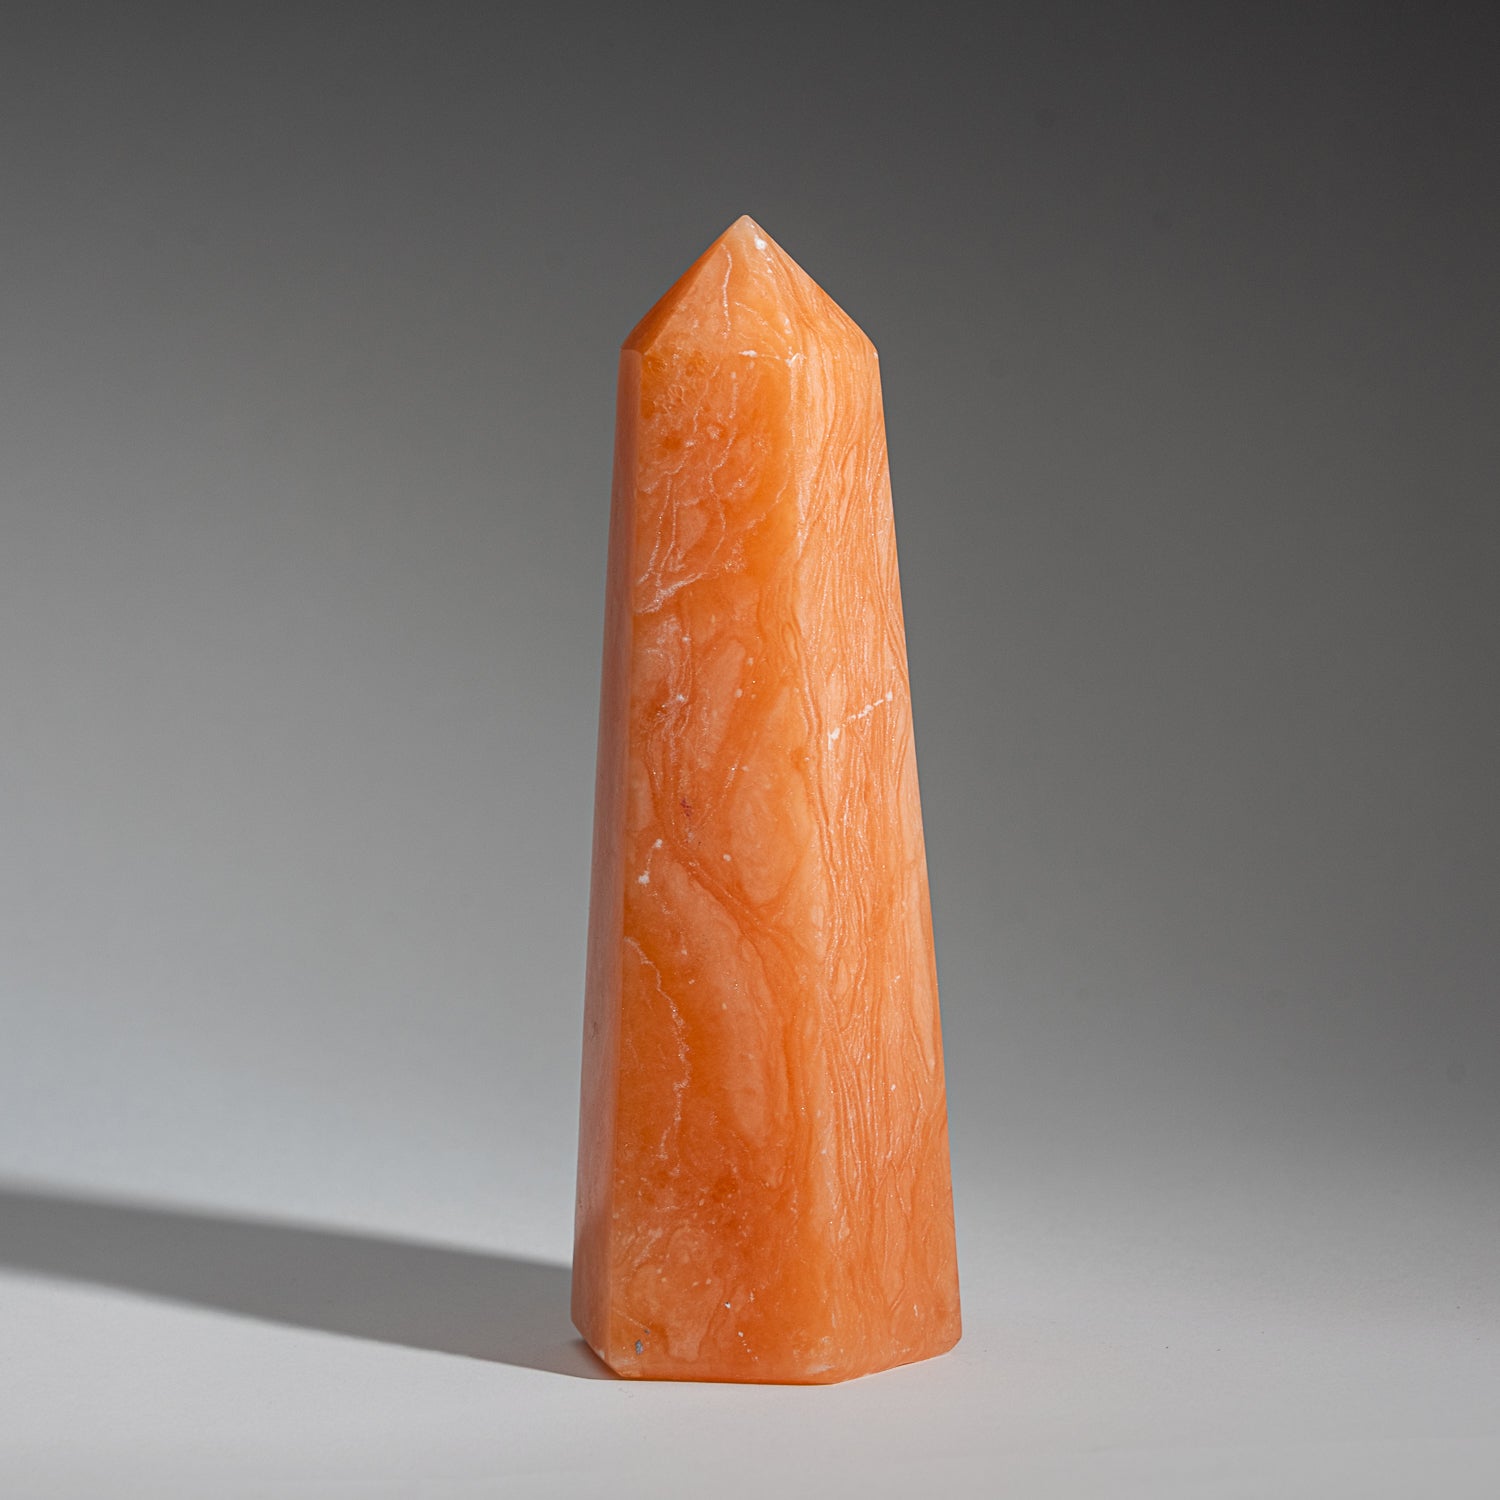 Genuine Polished Orange Selenite Point from Morocco (1.7 lbs)